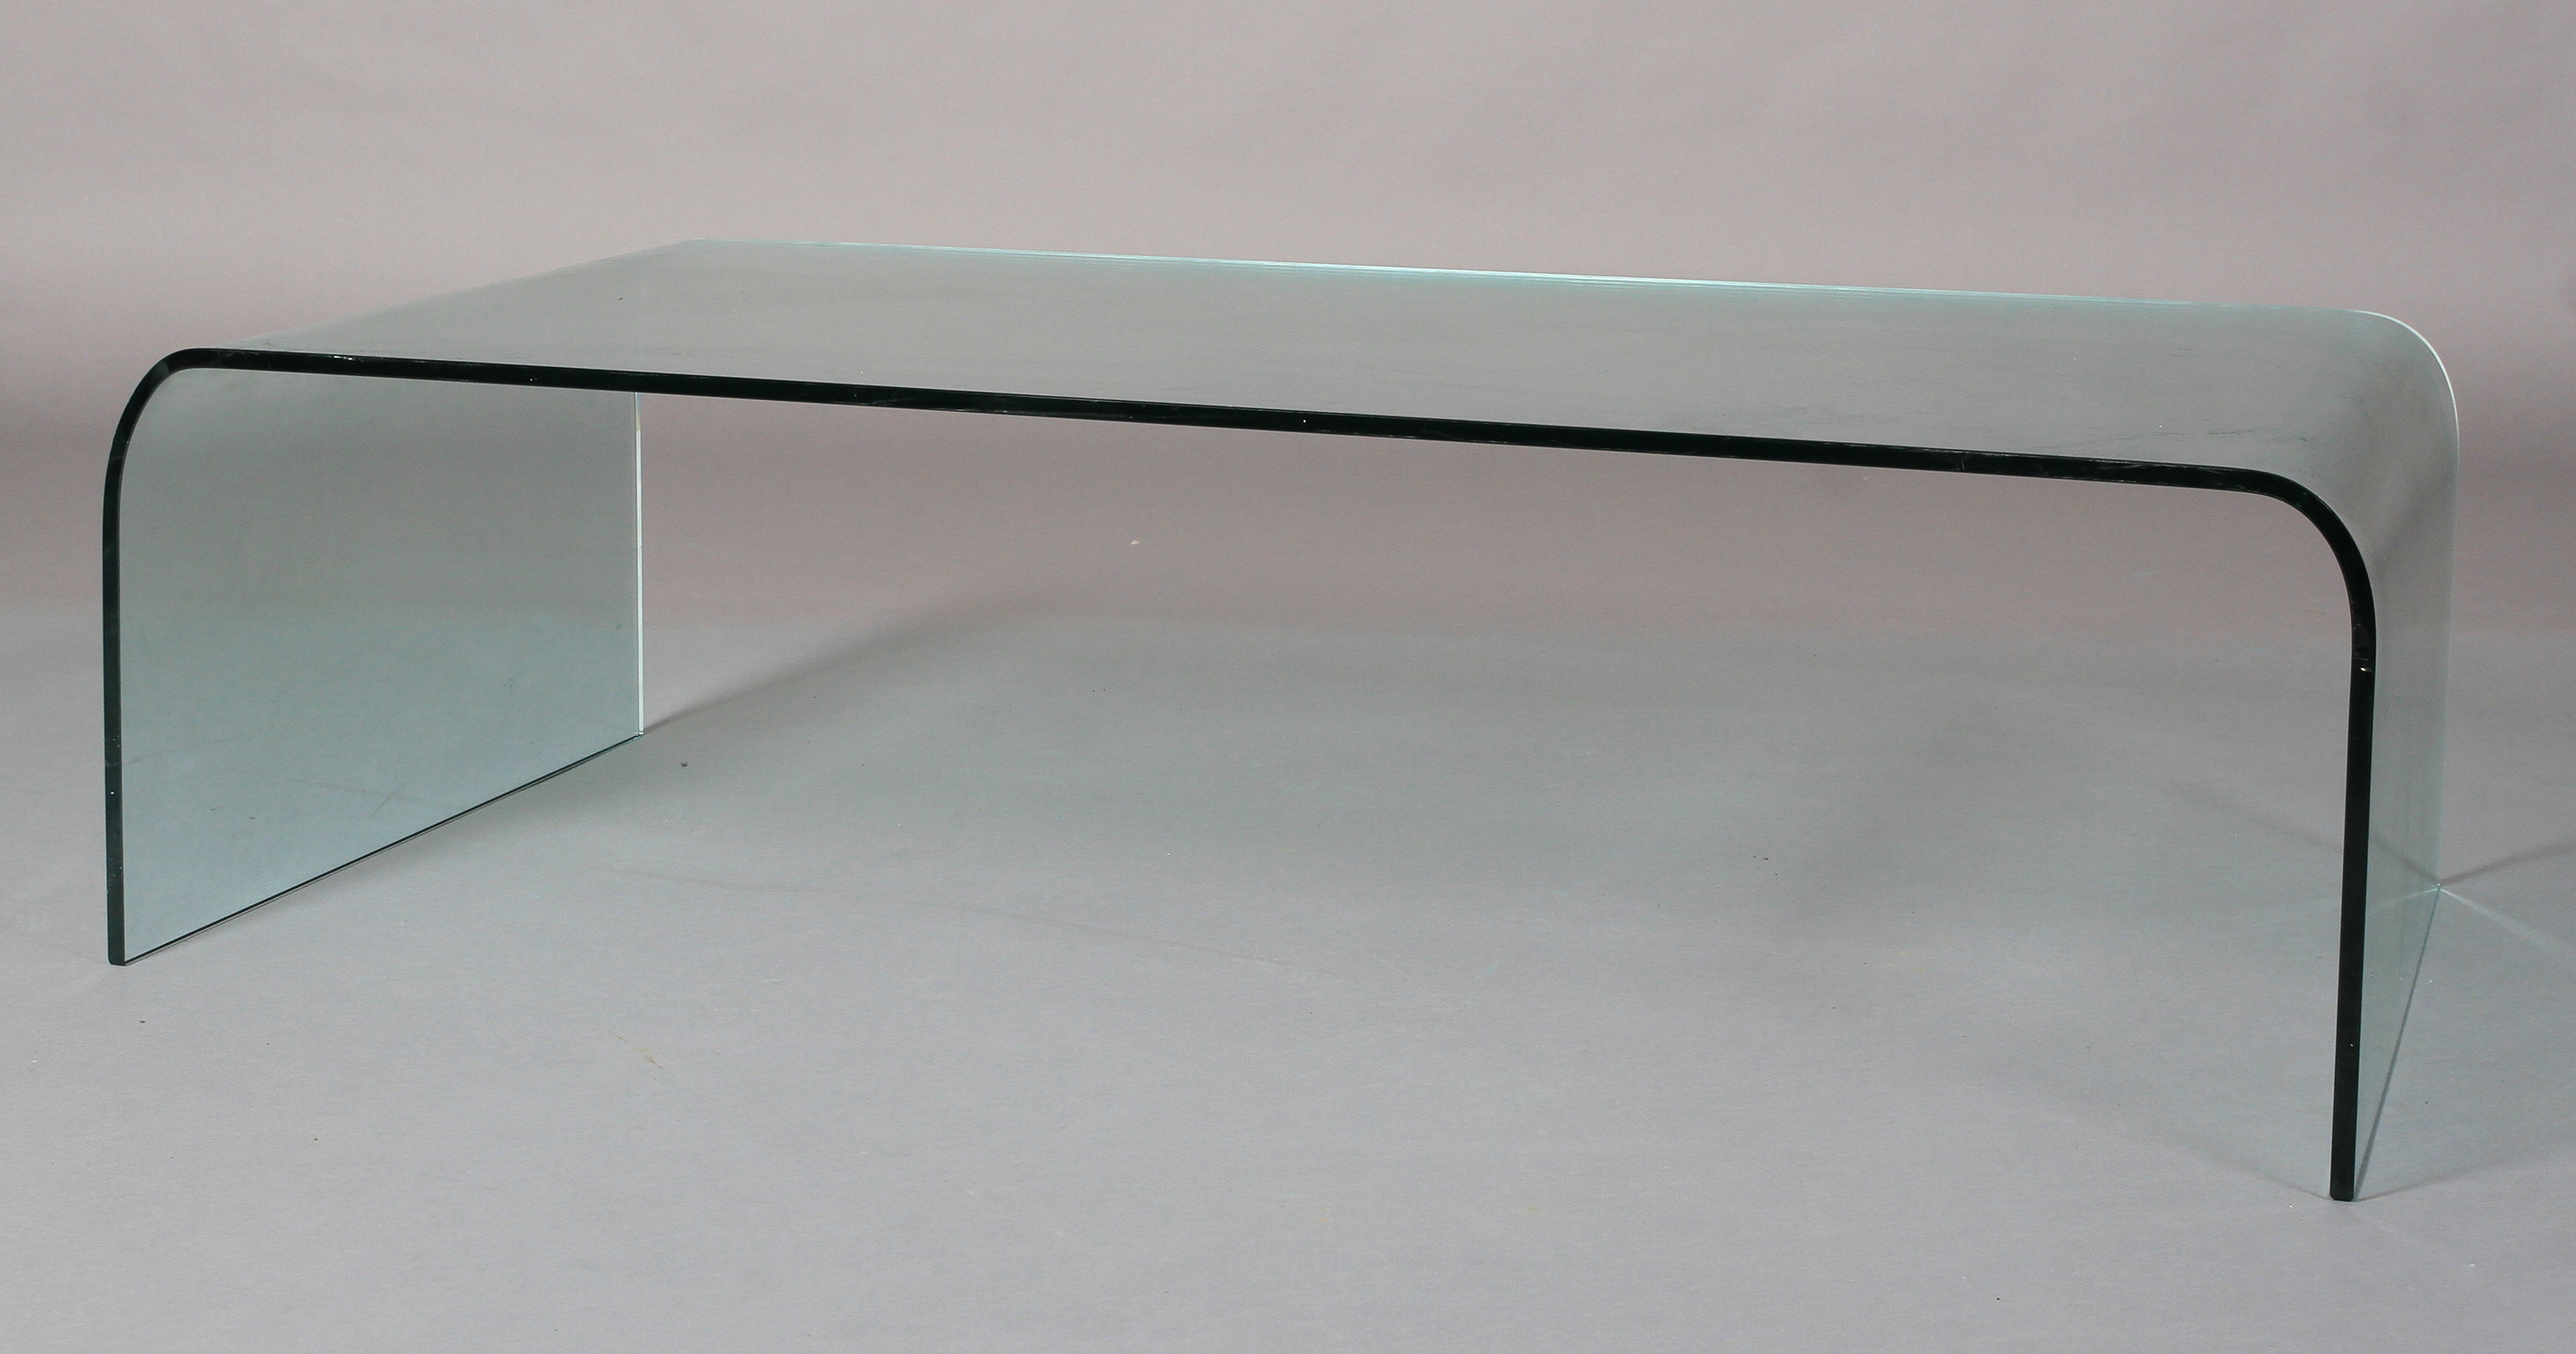 A curved glass coffee table 130cm long x 69cm wide x 38cm high - Image 2 of 2